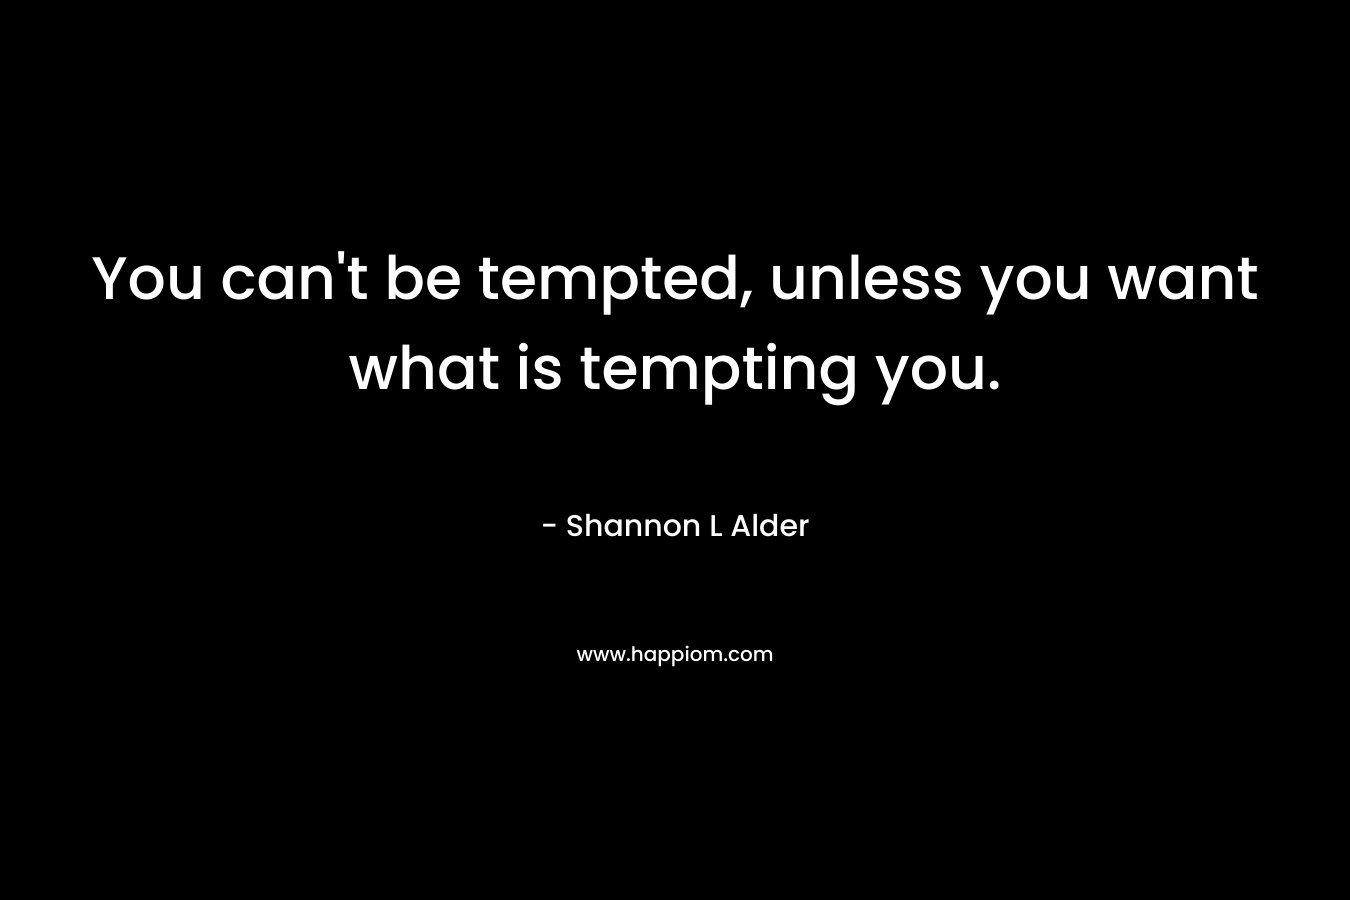 You can't be tempted, unless you want what is tempting you.